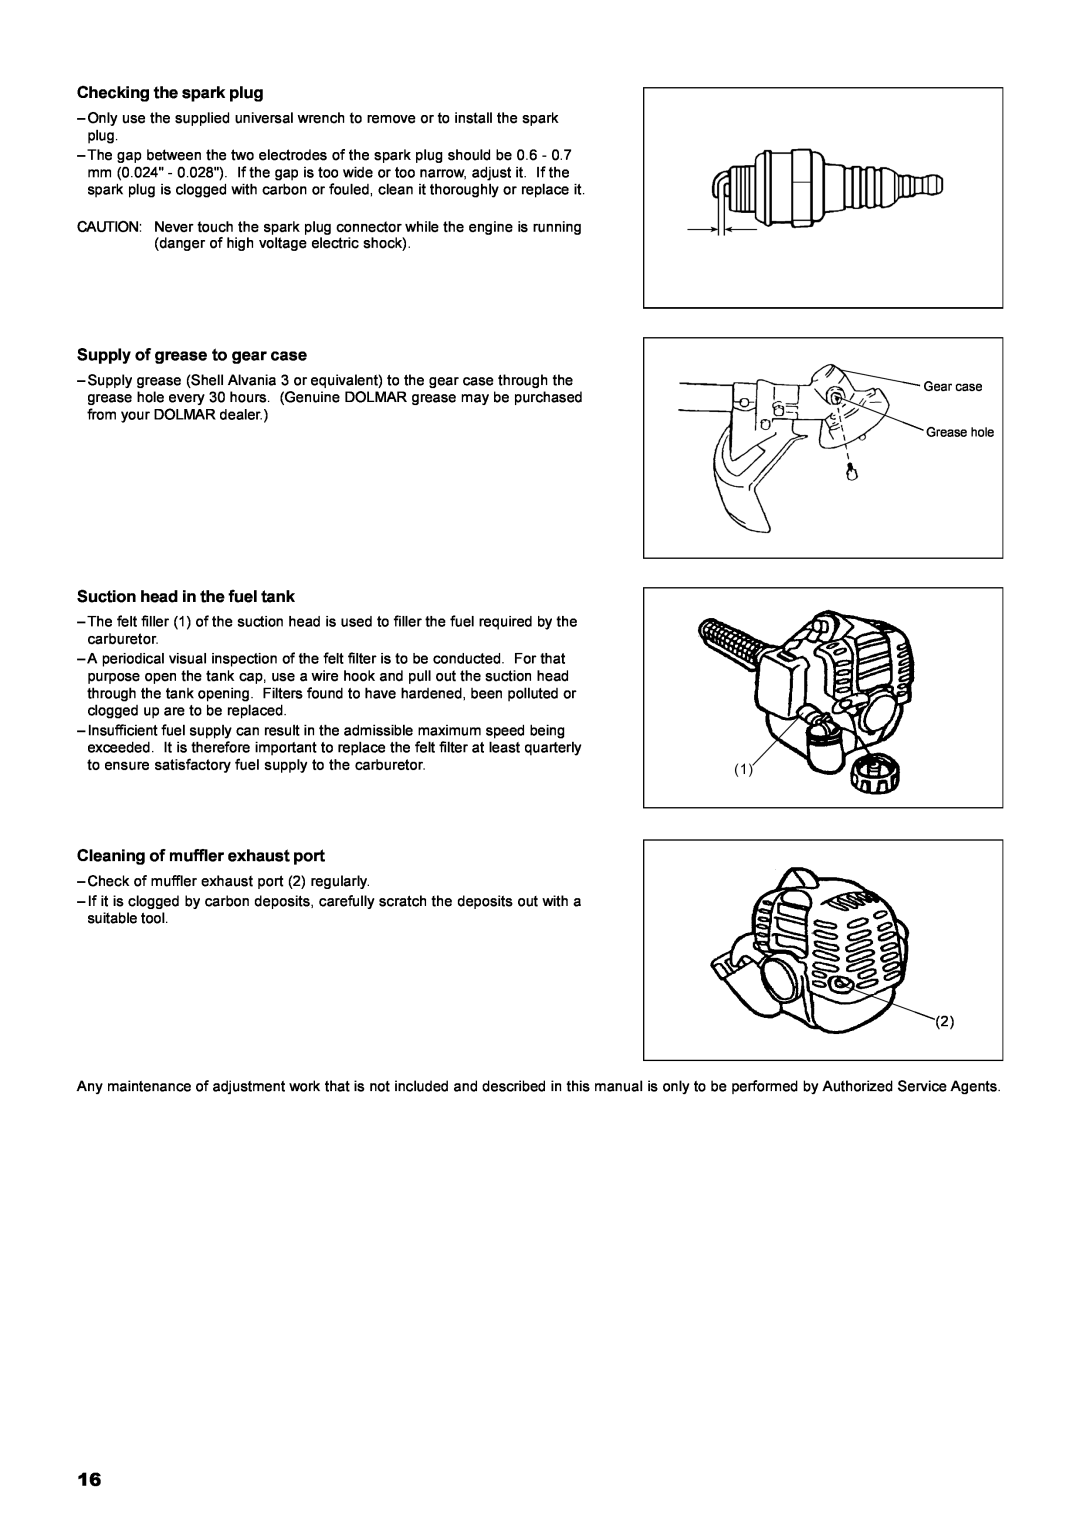 Dolmar MS-22C instruction manual Checking the spark plug, Supply of grease to gear case, Suction head in the fuel tank 